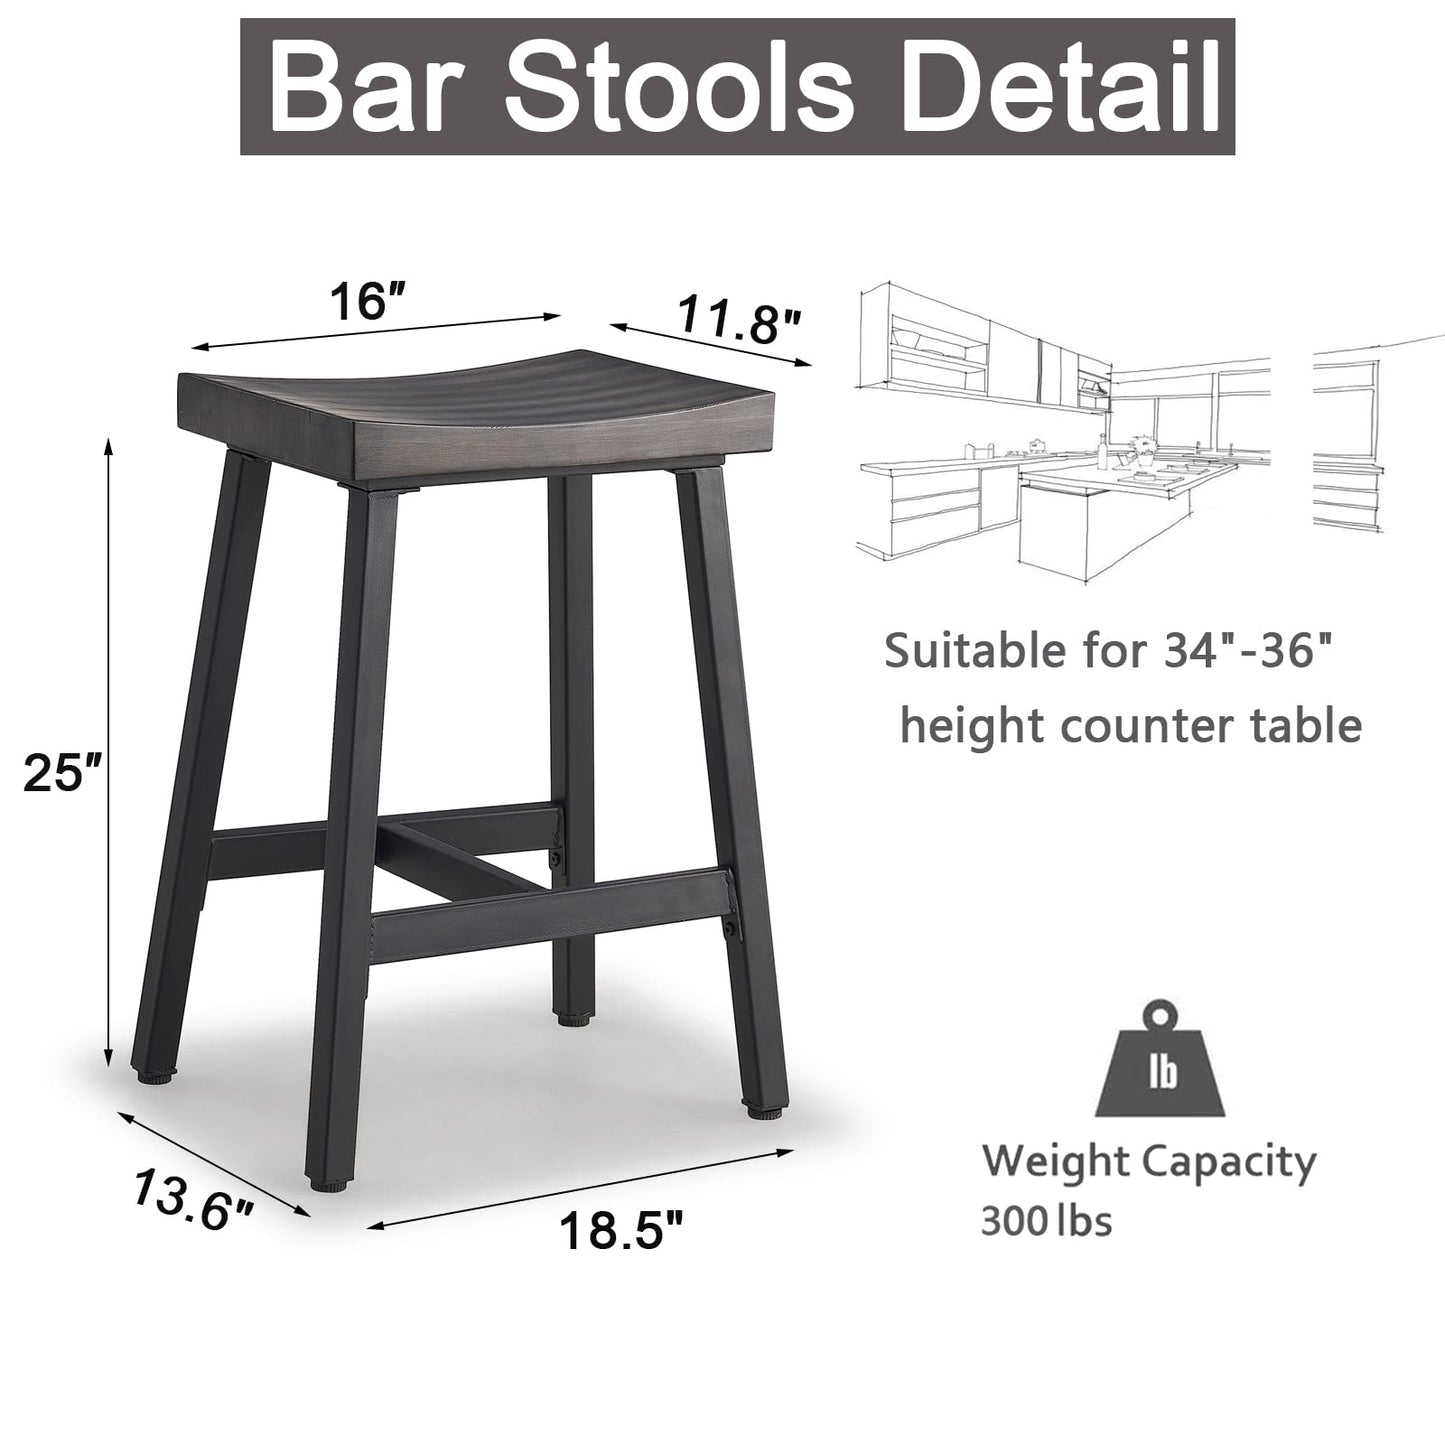 OUllUO Bar Stools, Saddle Seat Stool, 24 in Counter Height Stools, Grey Solid Wood Counter Stools with Metal Base, Backless Stools for Kitchen Counter, Island, Home Bar,Restaurant,521P-BGWD1